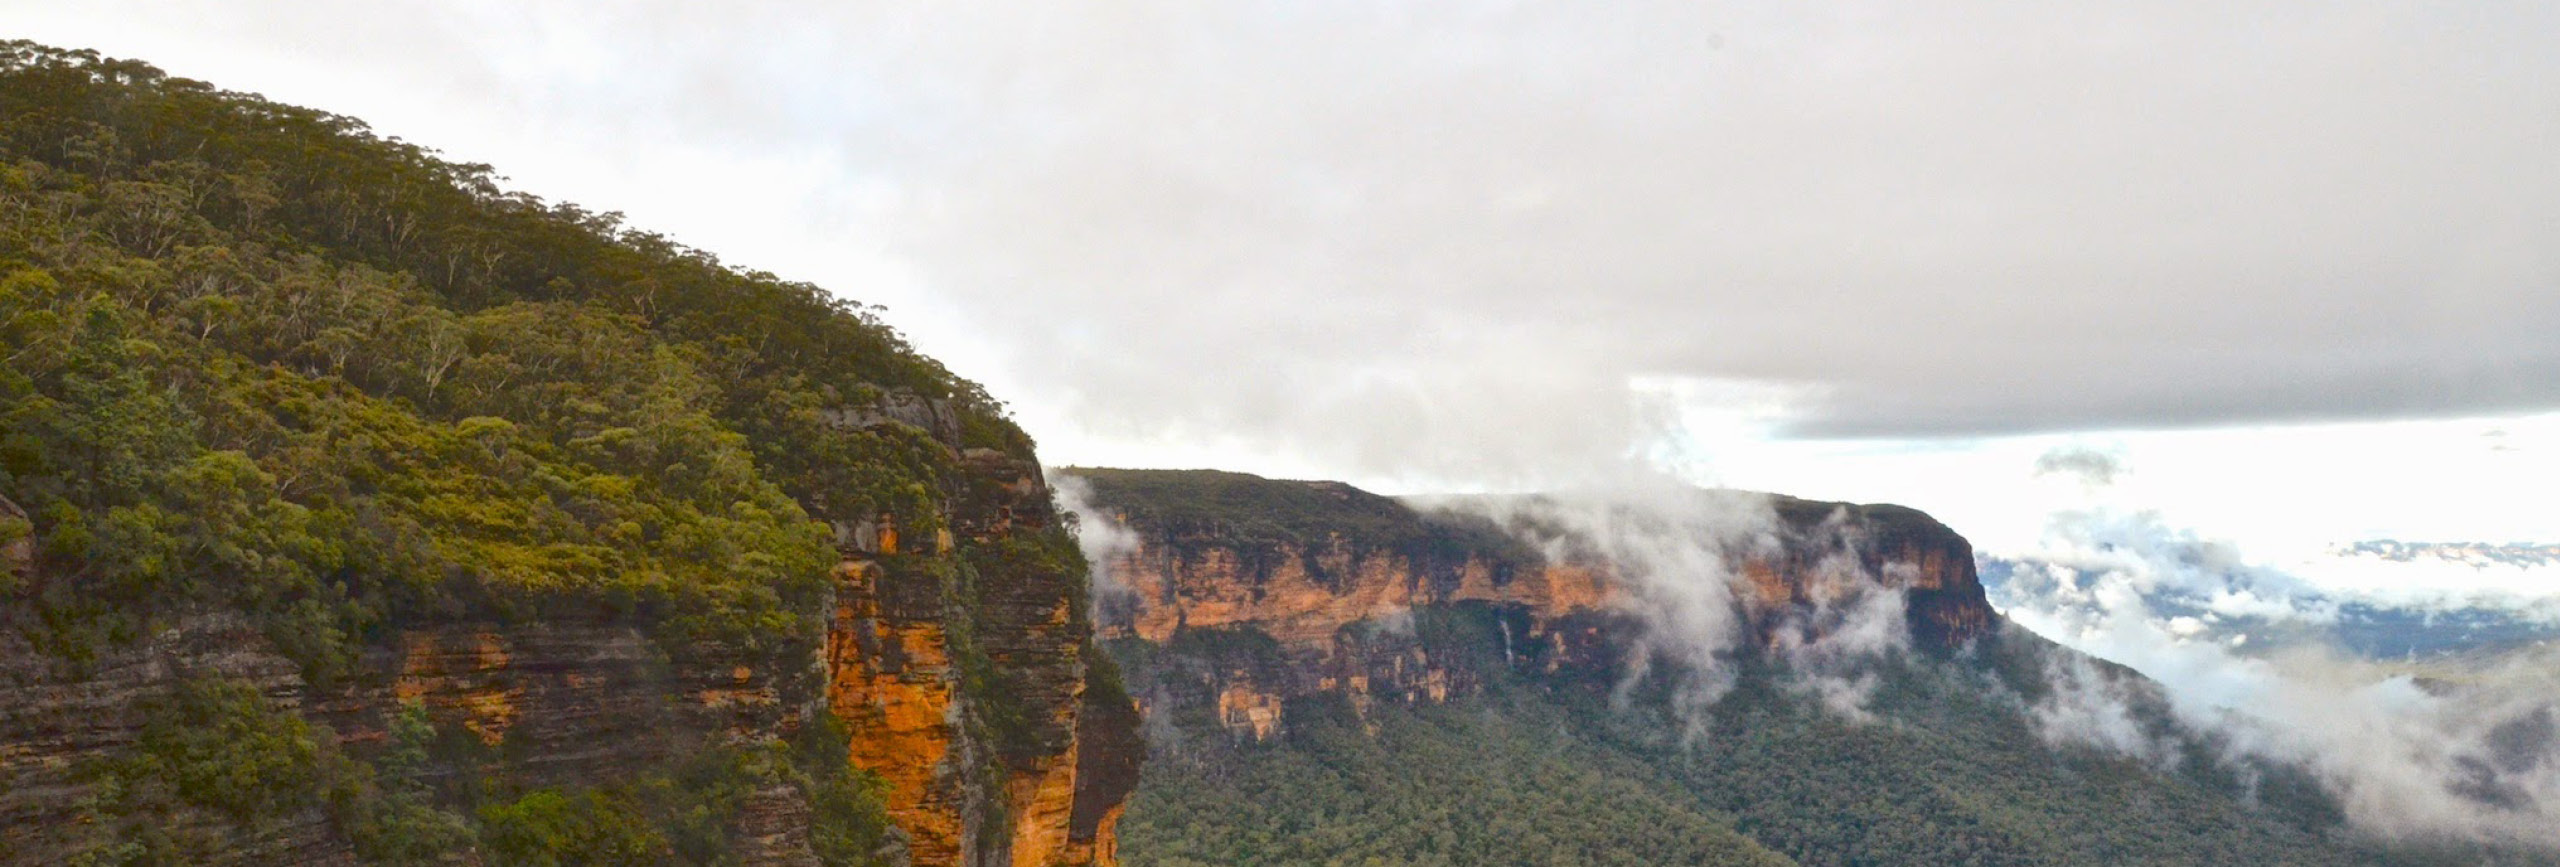 National Pass in the Blue Mountains, NSW